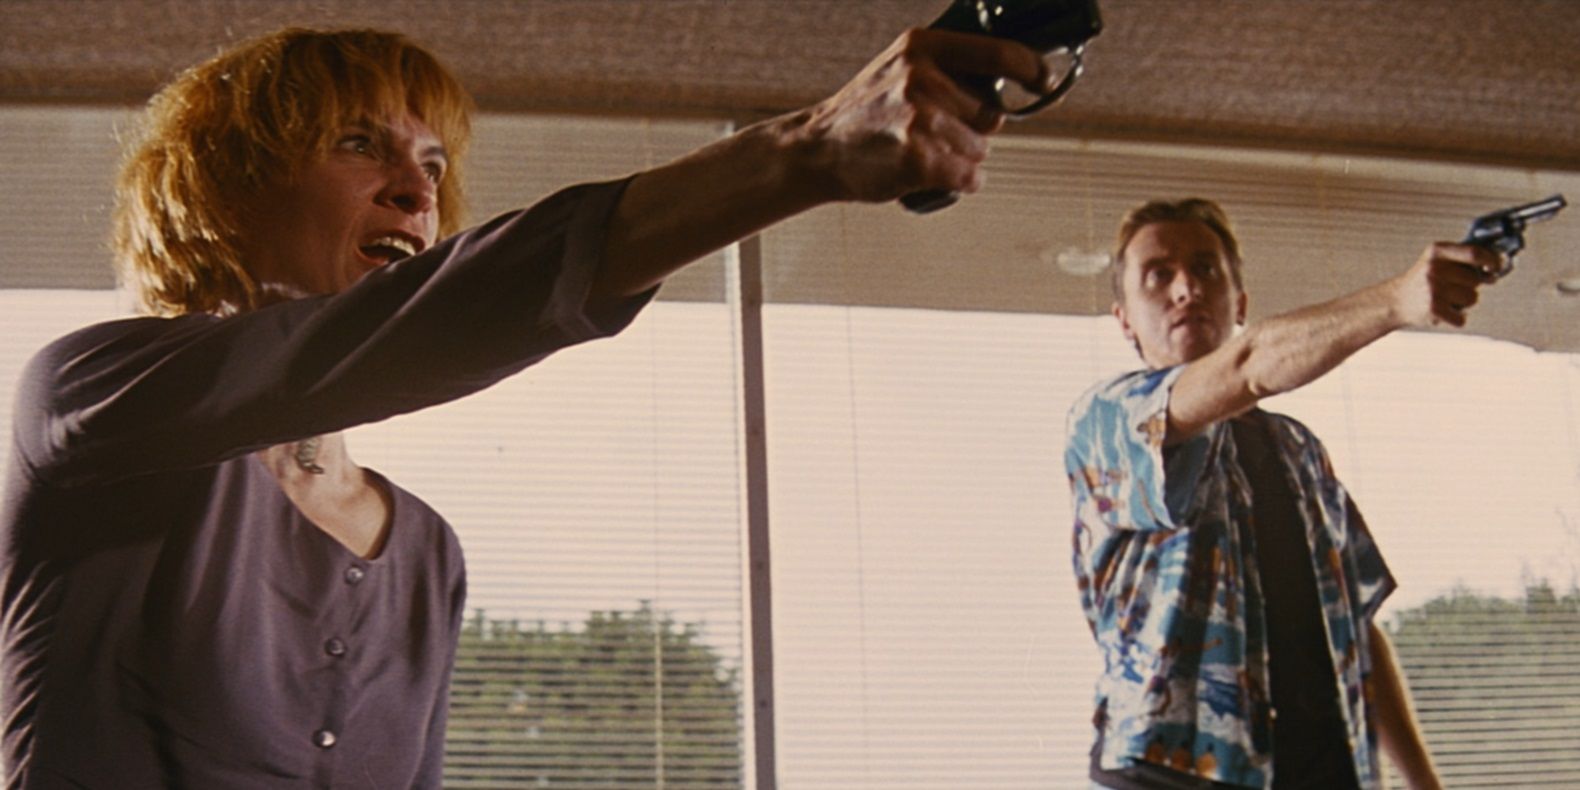 Pumpkin and Honey Bunny stick up a diner in Pulp Fiction